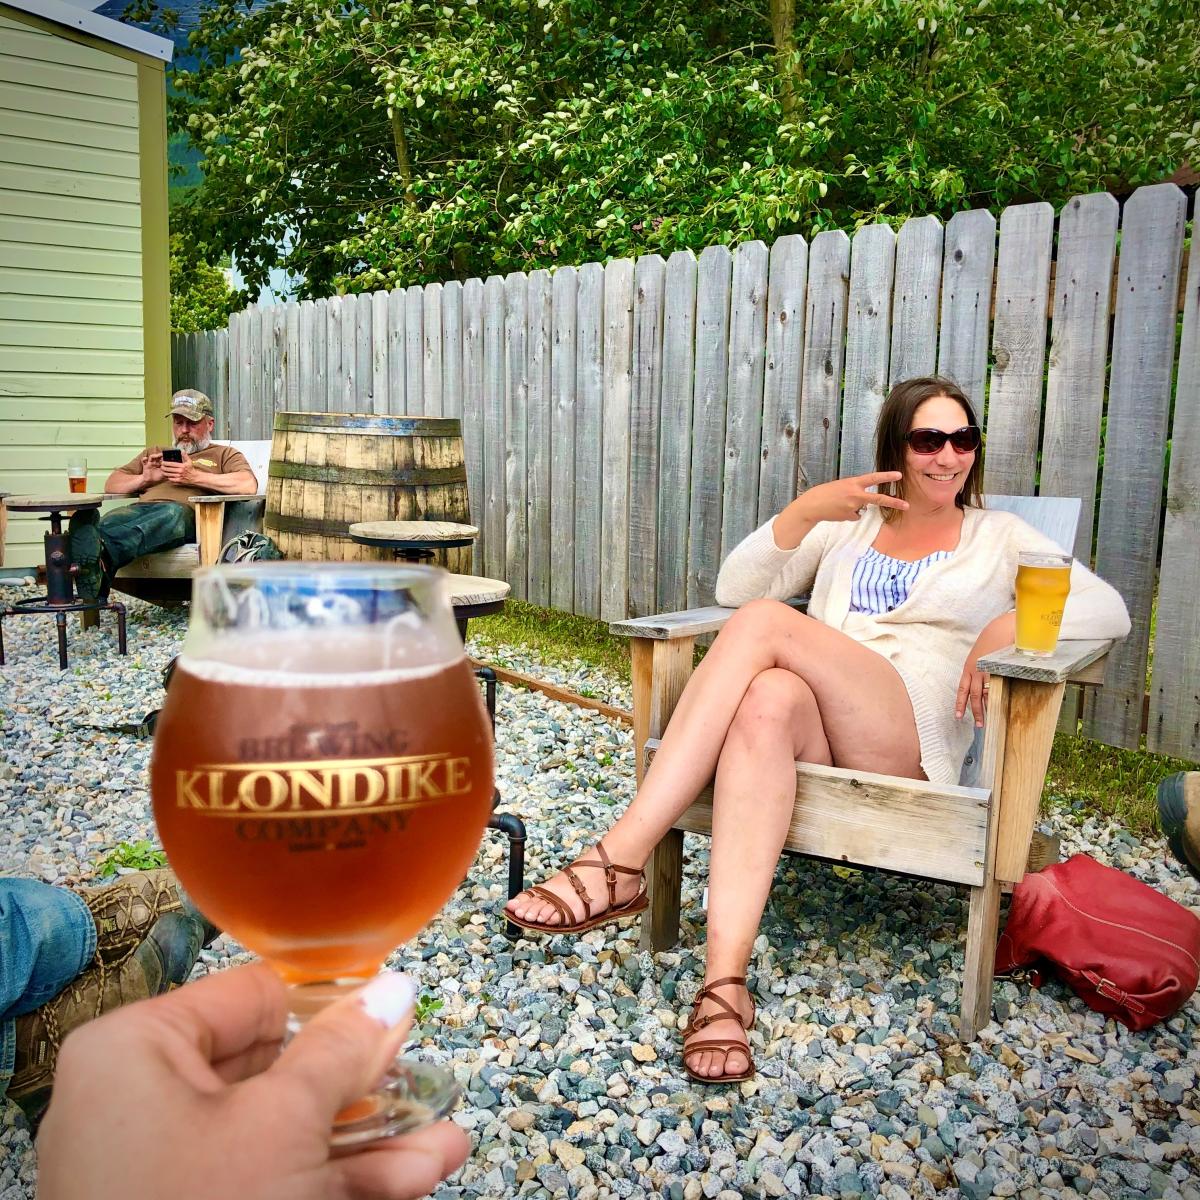 Glass raised to lady enjoying a beer and flashing the peace sign outdoors at Klondike brewing